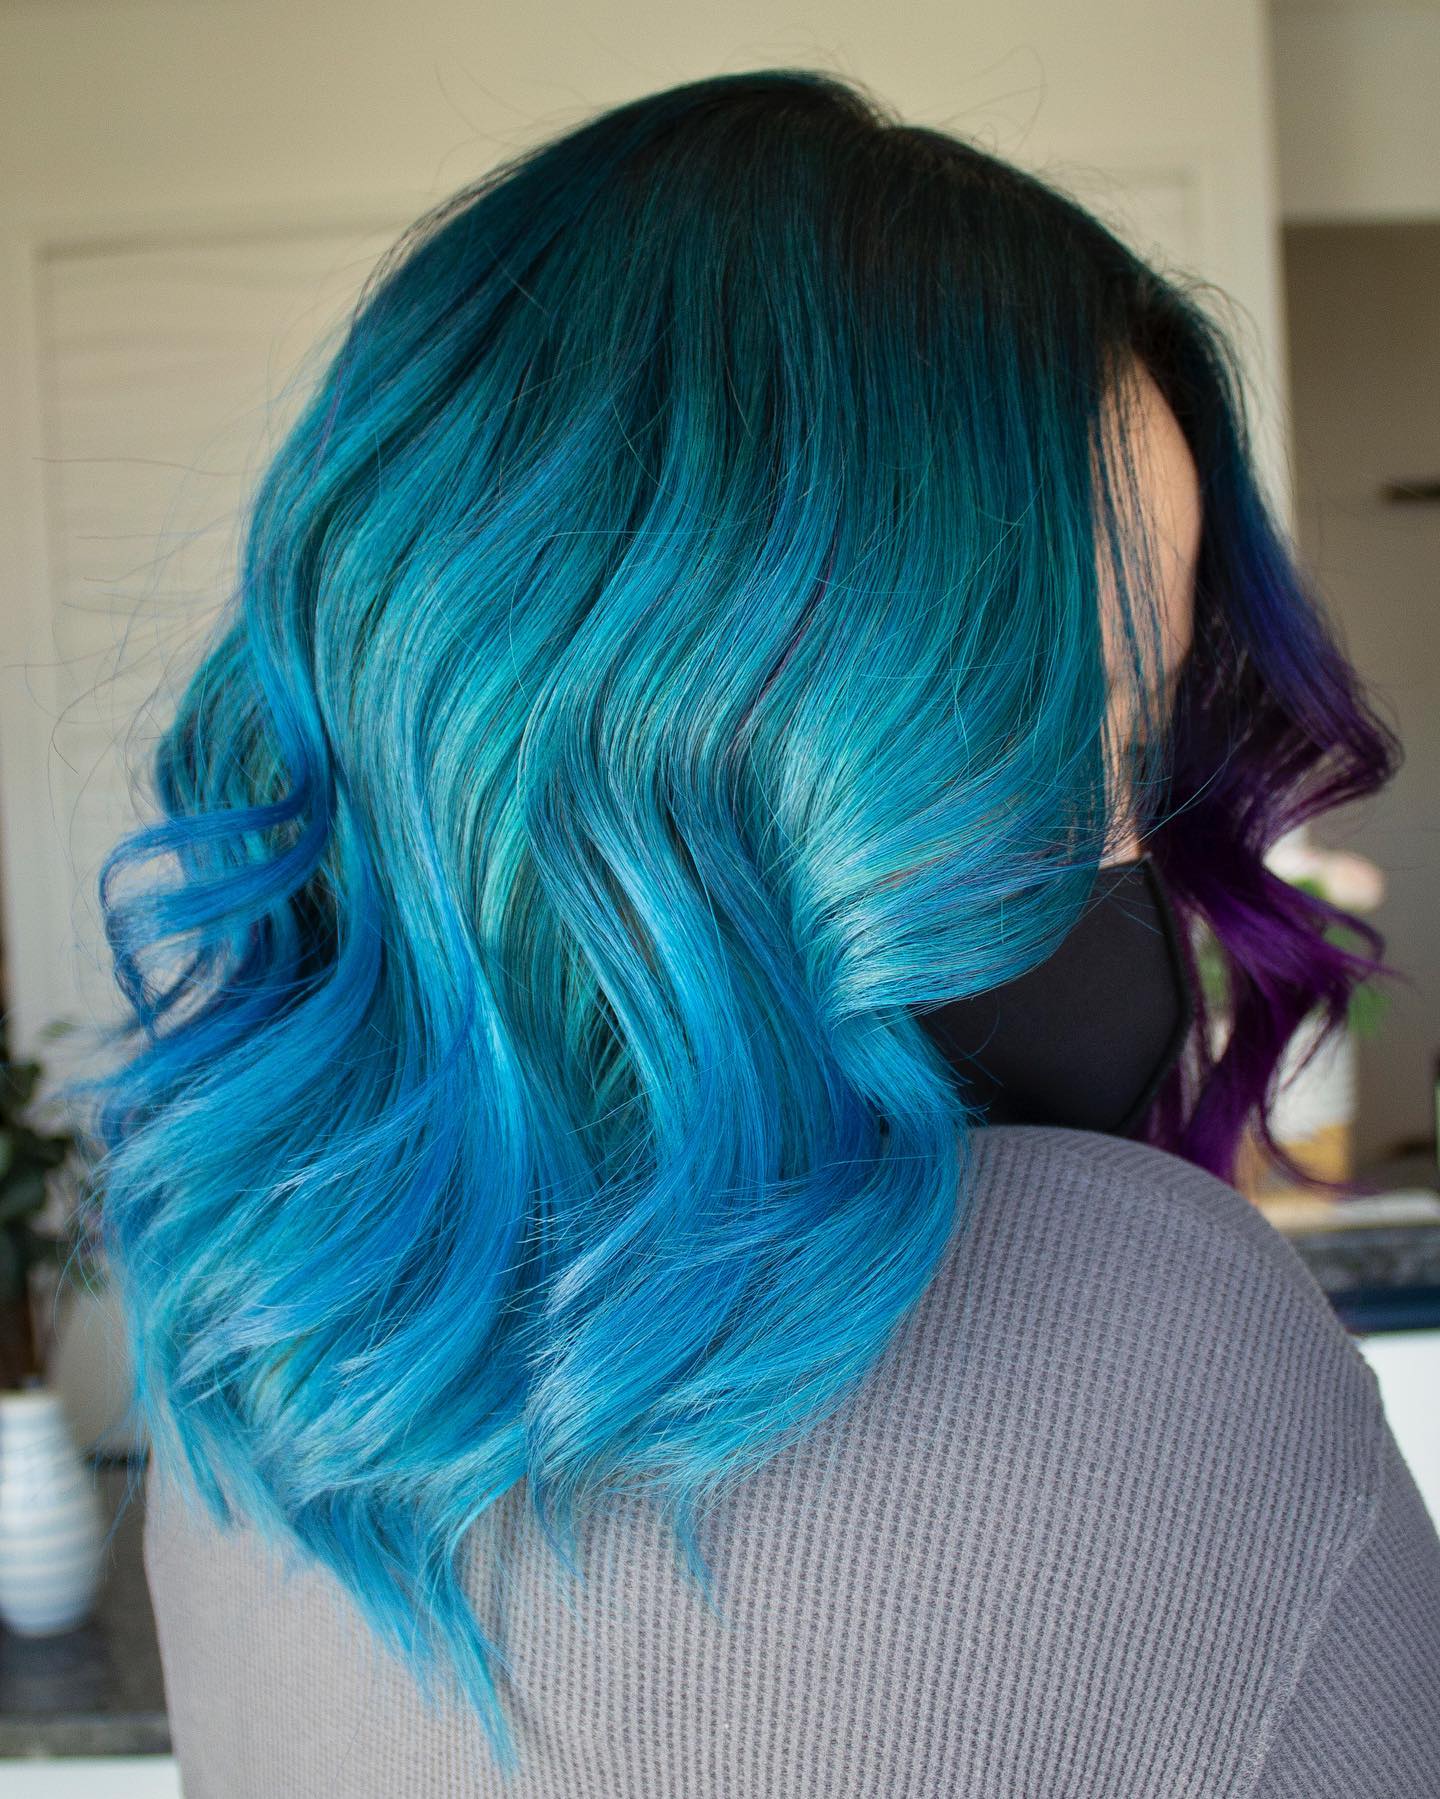 22 Cool Turquoise Hair Ideas For A Bold And Vibrant Look - Hairstyle